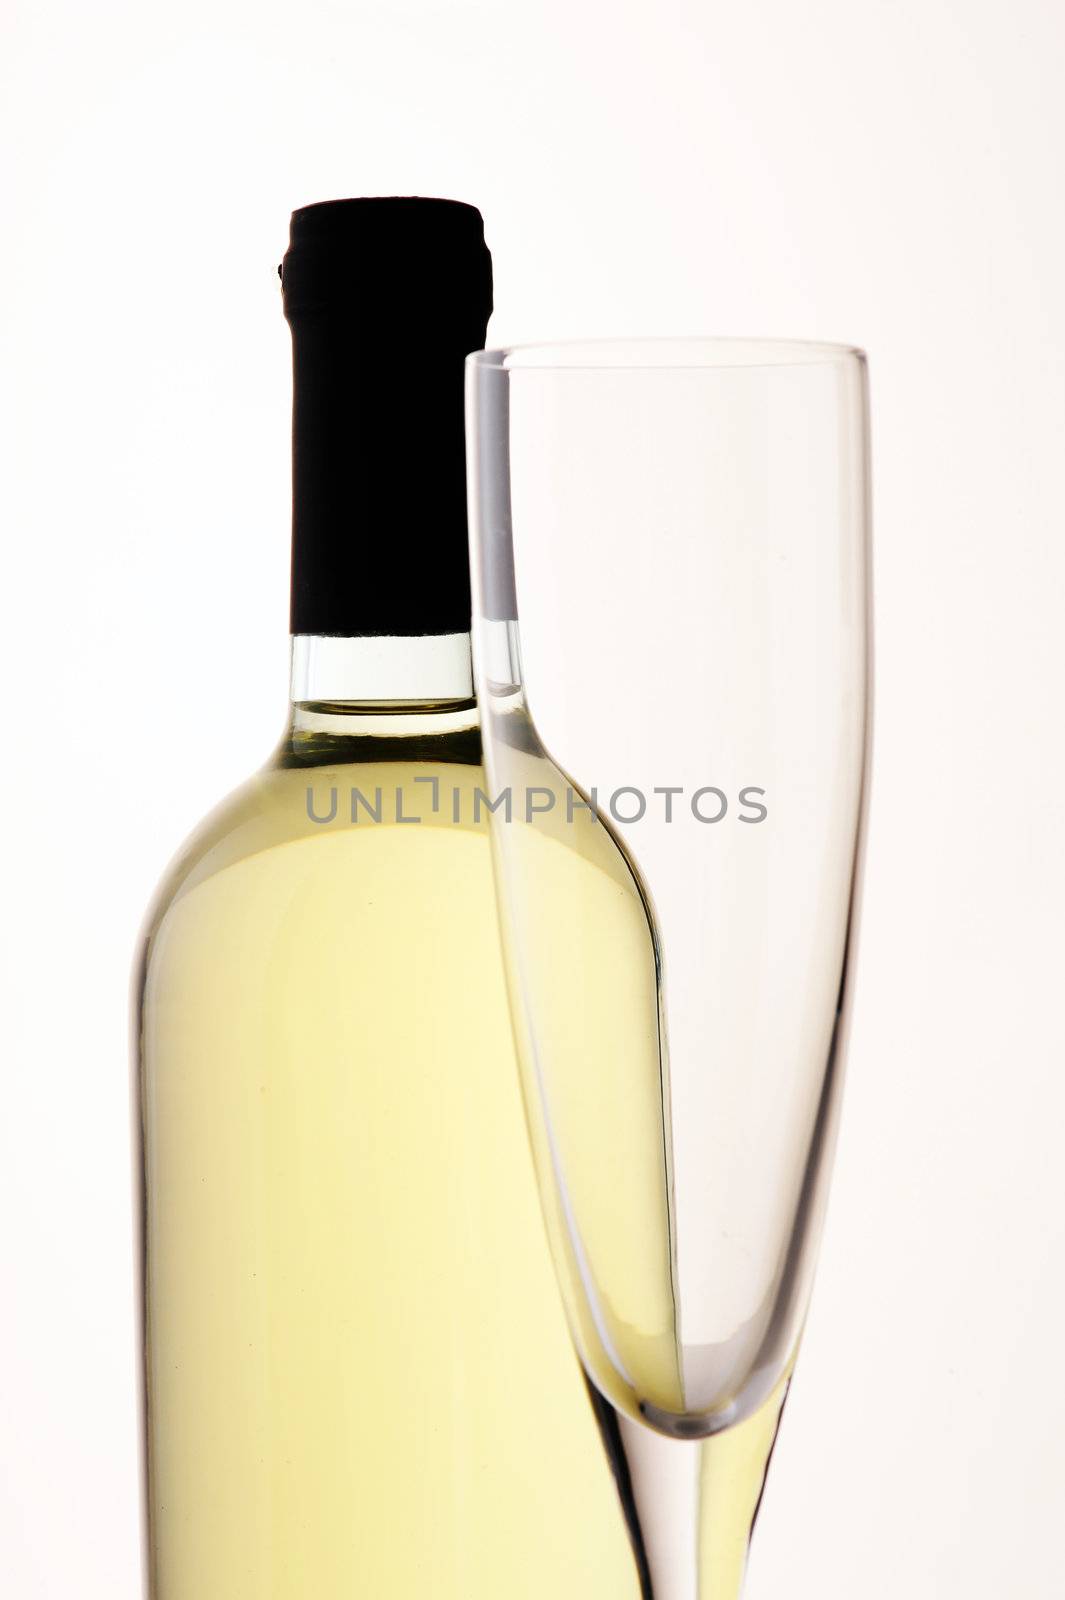 wine bottle and glass by stokkete